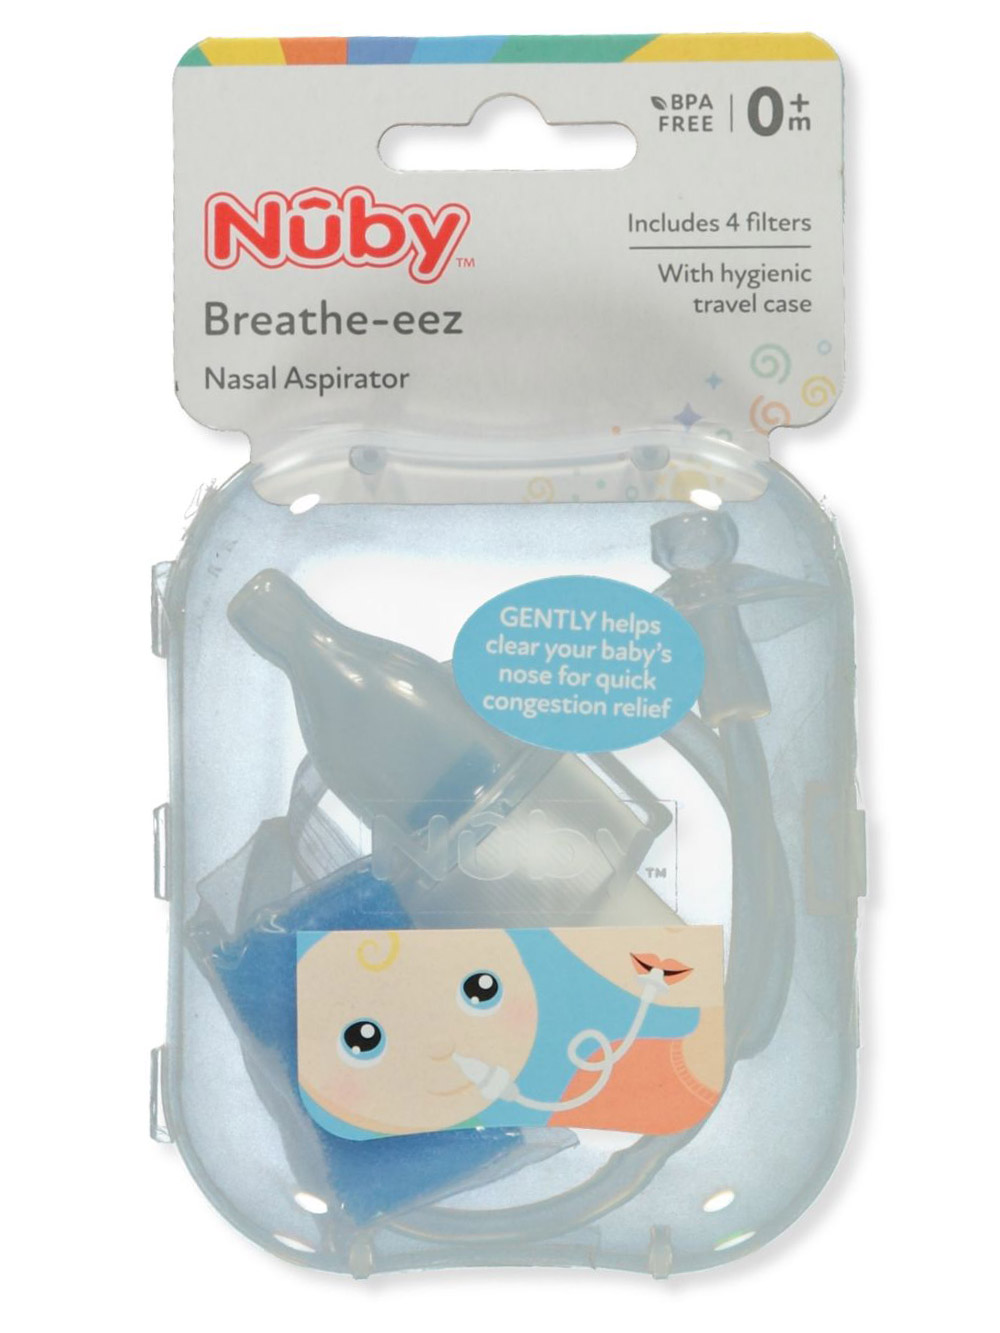 Nuby Nasal Aspirator With Filters on Vimeo